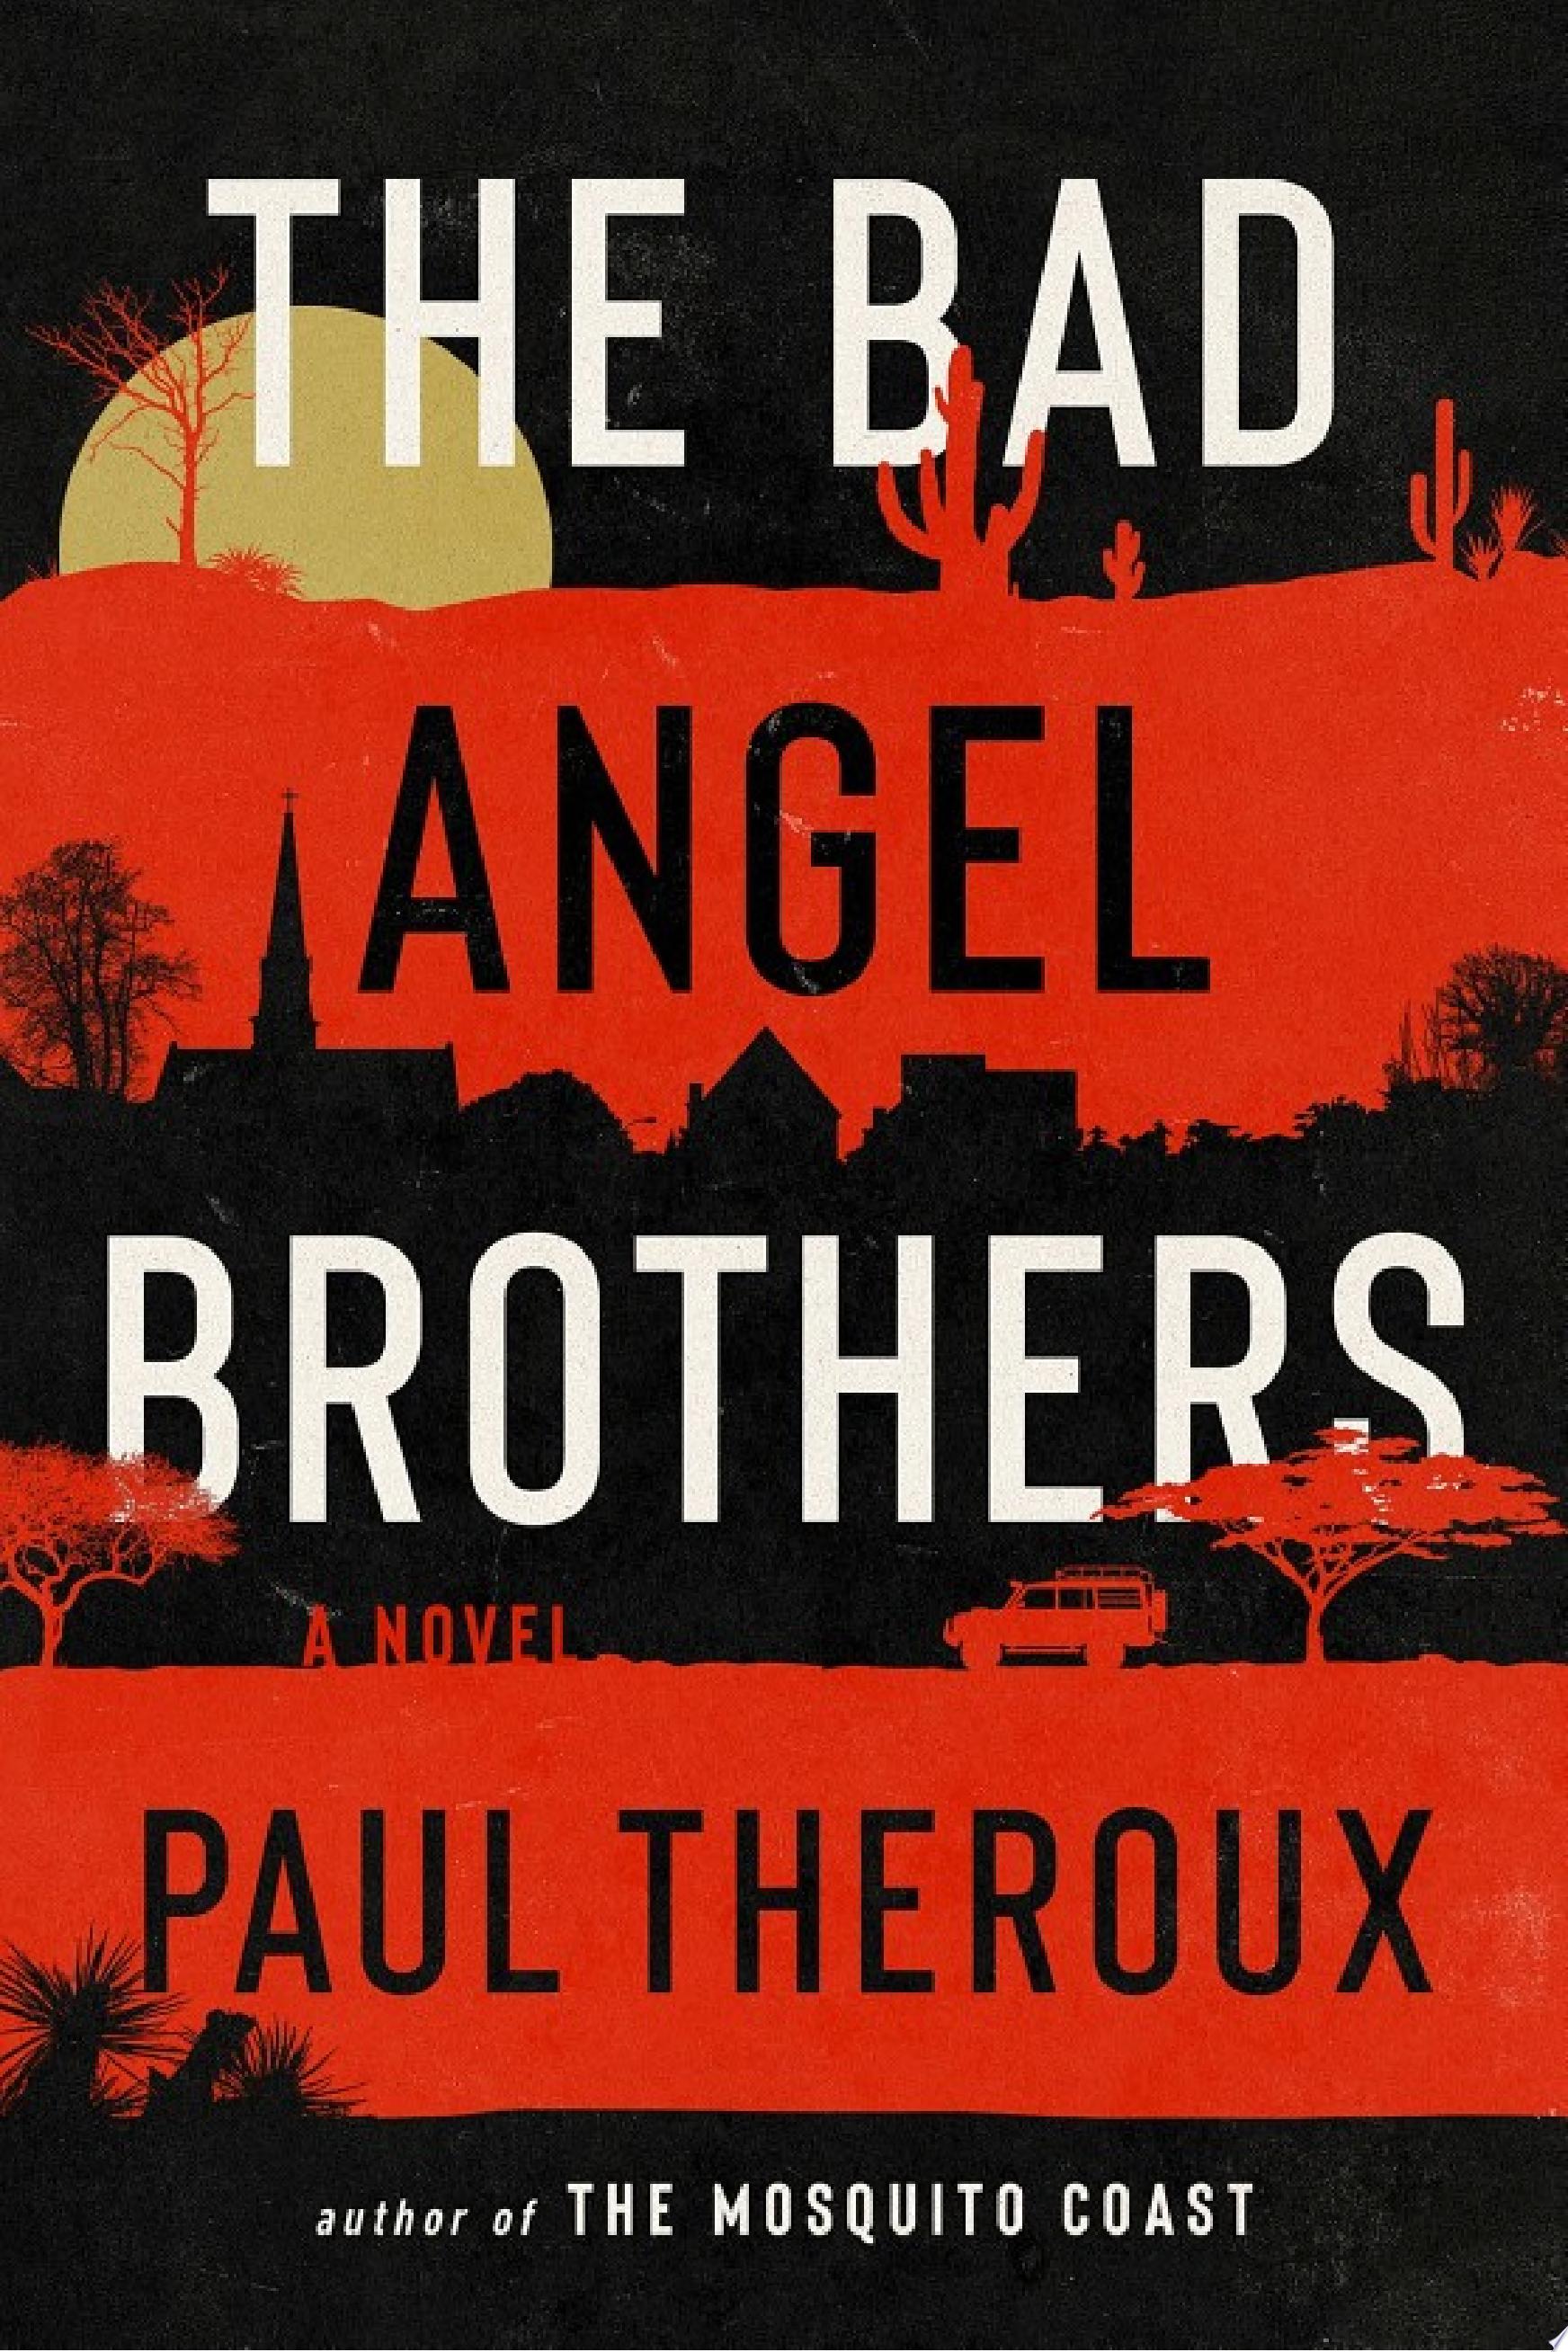 Image for "The Bad Angel Brothers"